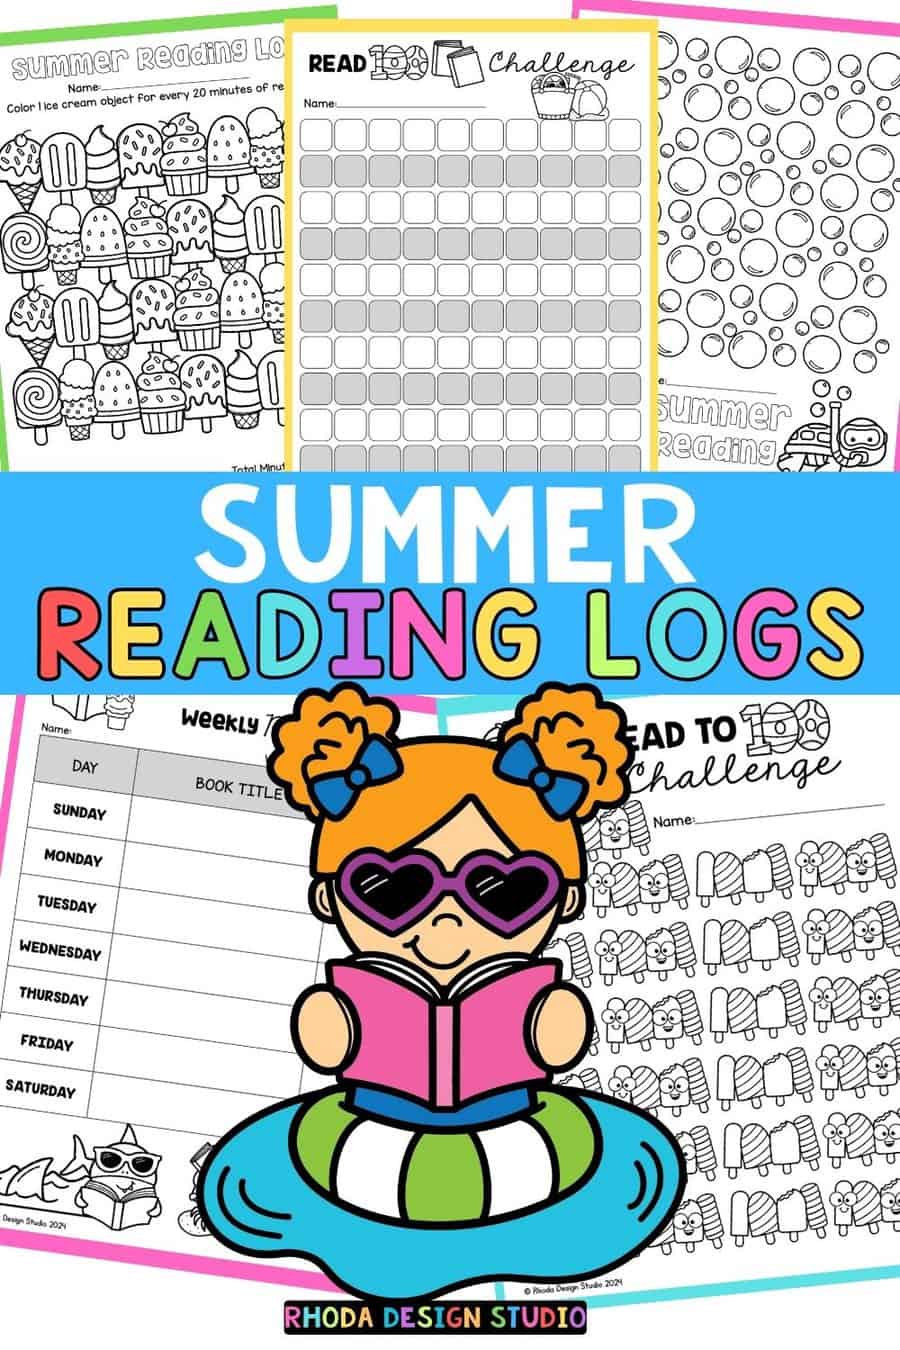 Get your kids excited about reading this summer! Download our free printable summer reading log and start tracking their reading minutes today.